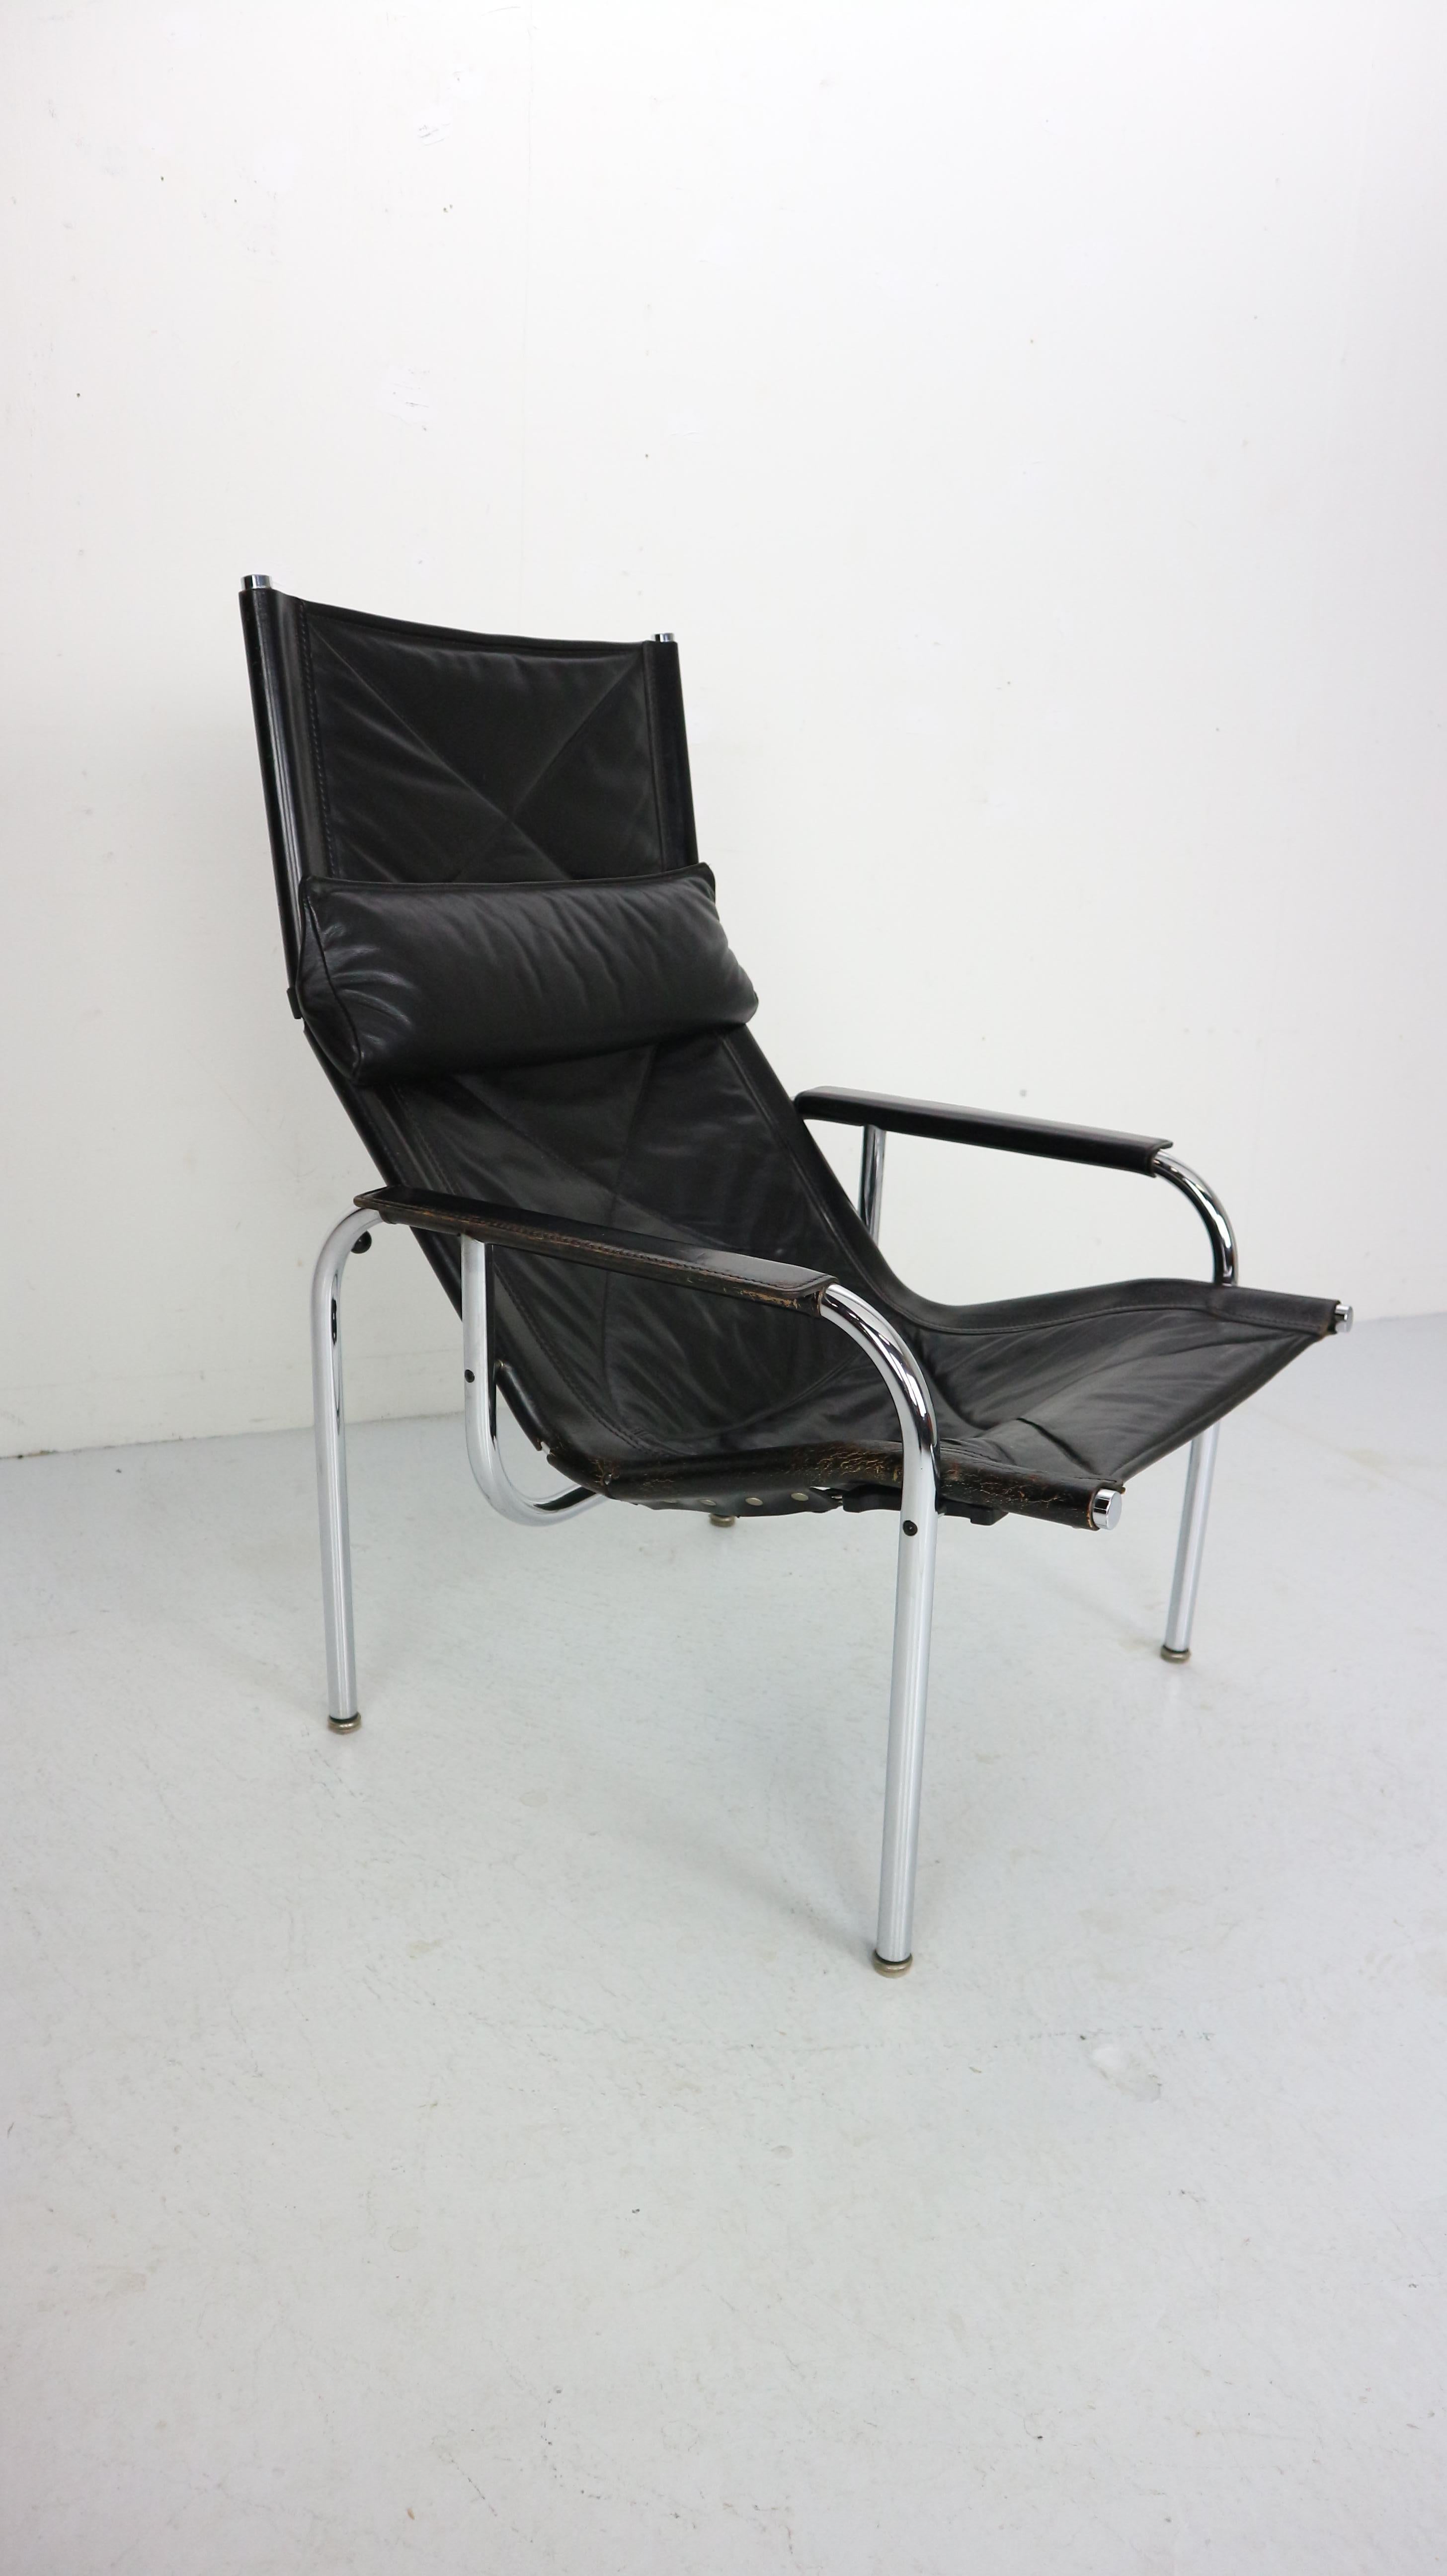 Hans Eichenberger easy chair for Strassle designed in 1978 Switzerland.

This lounge chair has chrome frame and stitched black harness leather, brass details in a very good vintage condition. The lounge chair can be set in three different